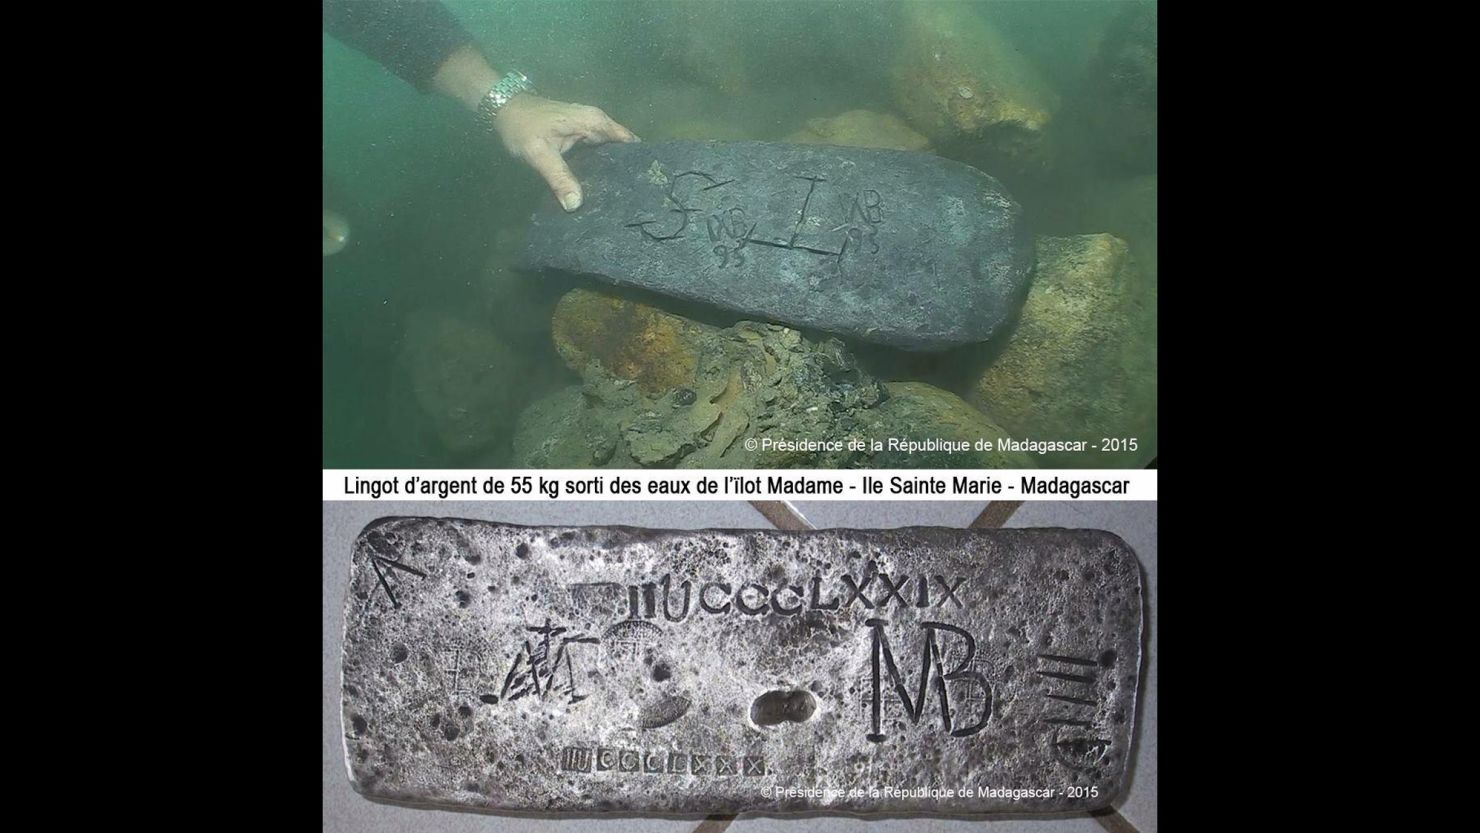 The office of Madagascar's President released photos of a silver bar that may have belonged to Capt. Kidd.